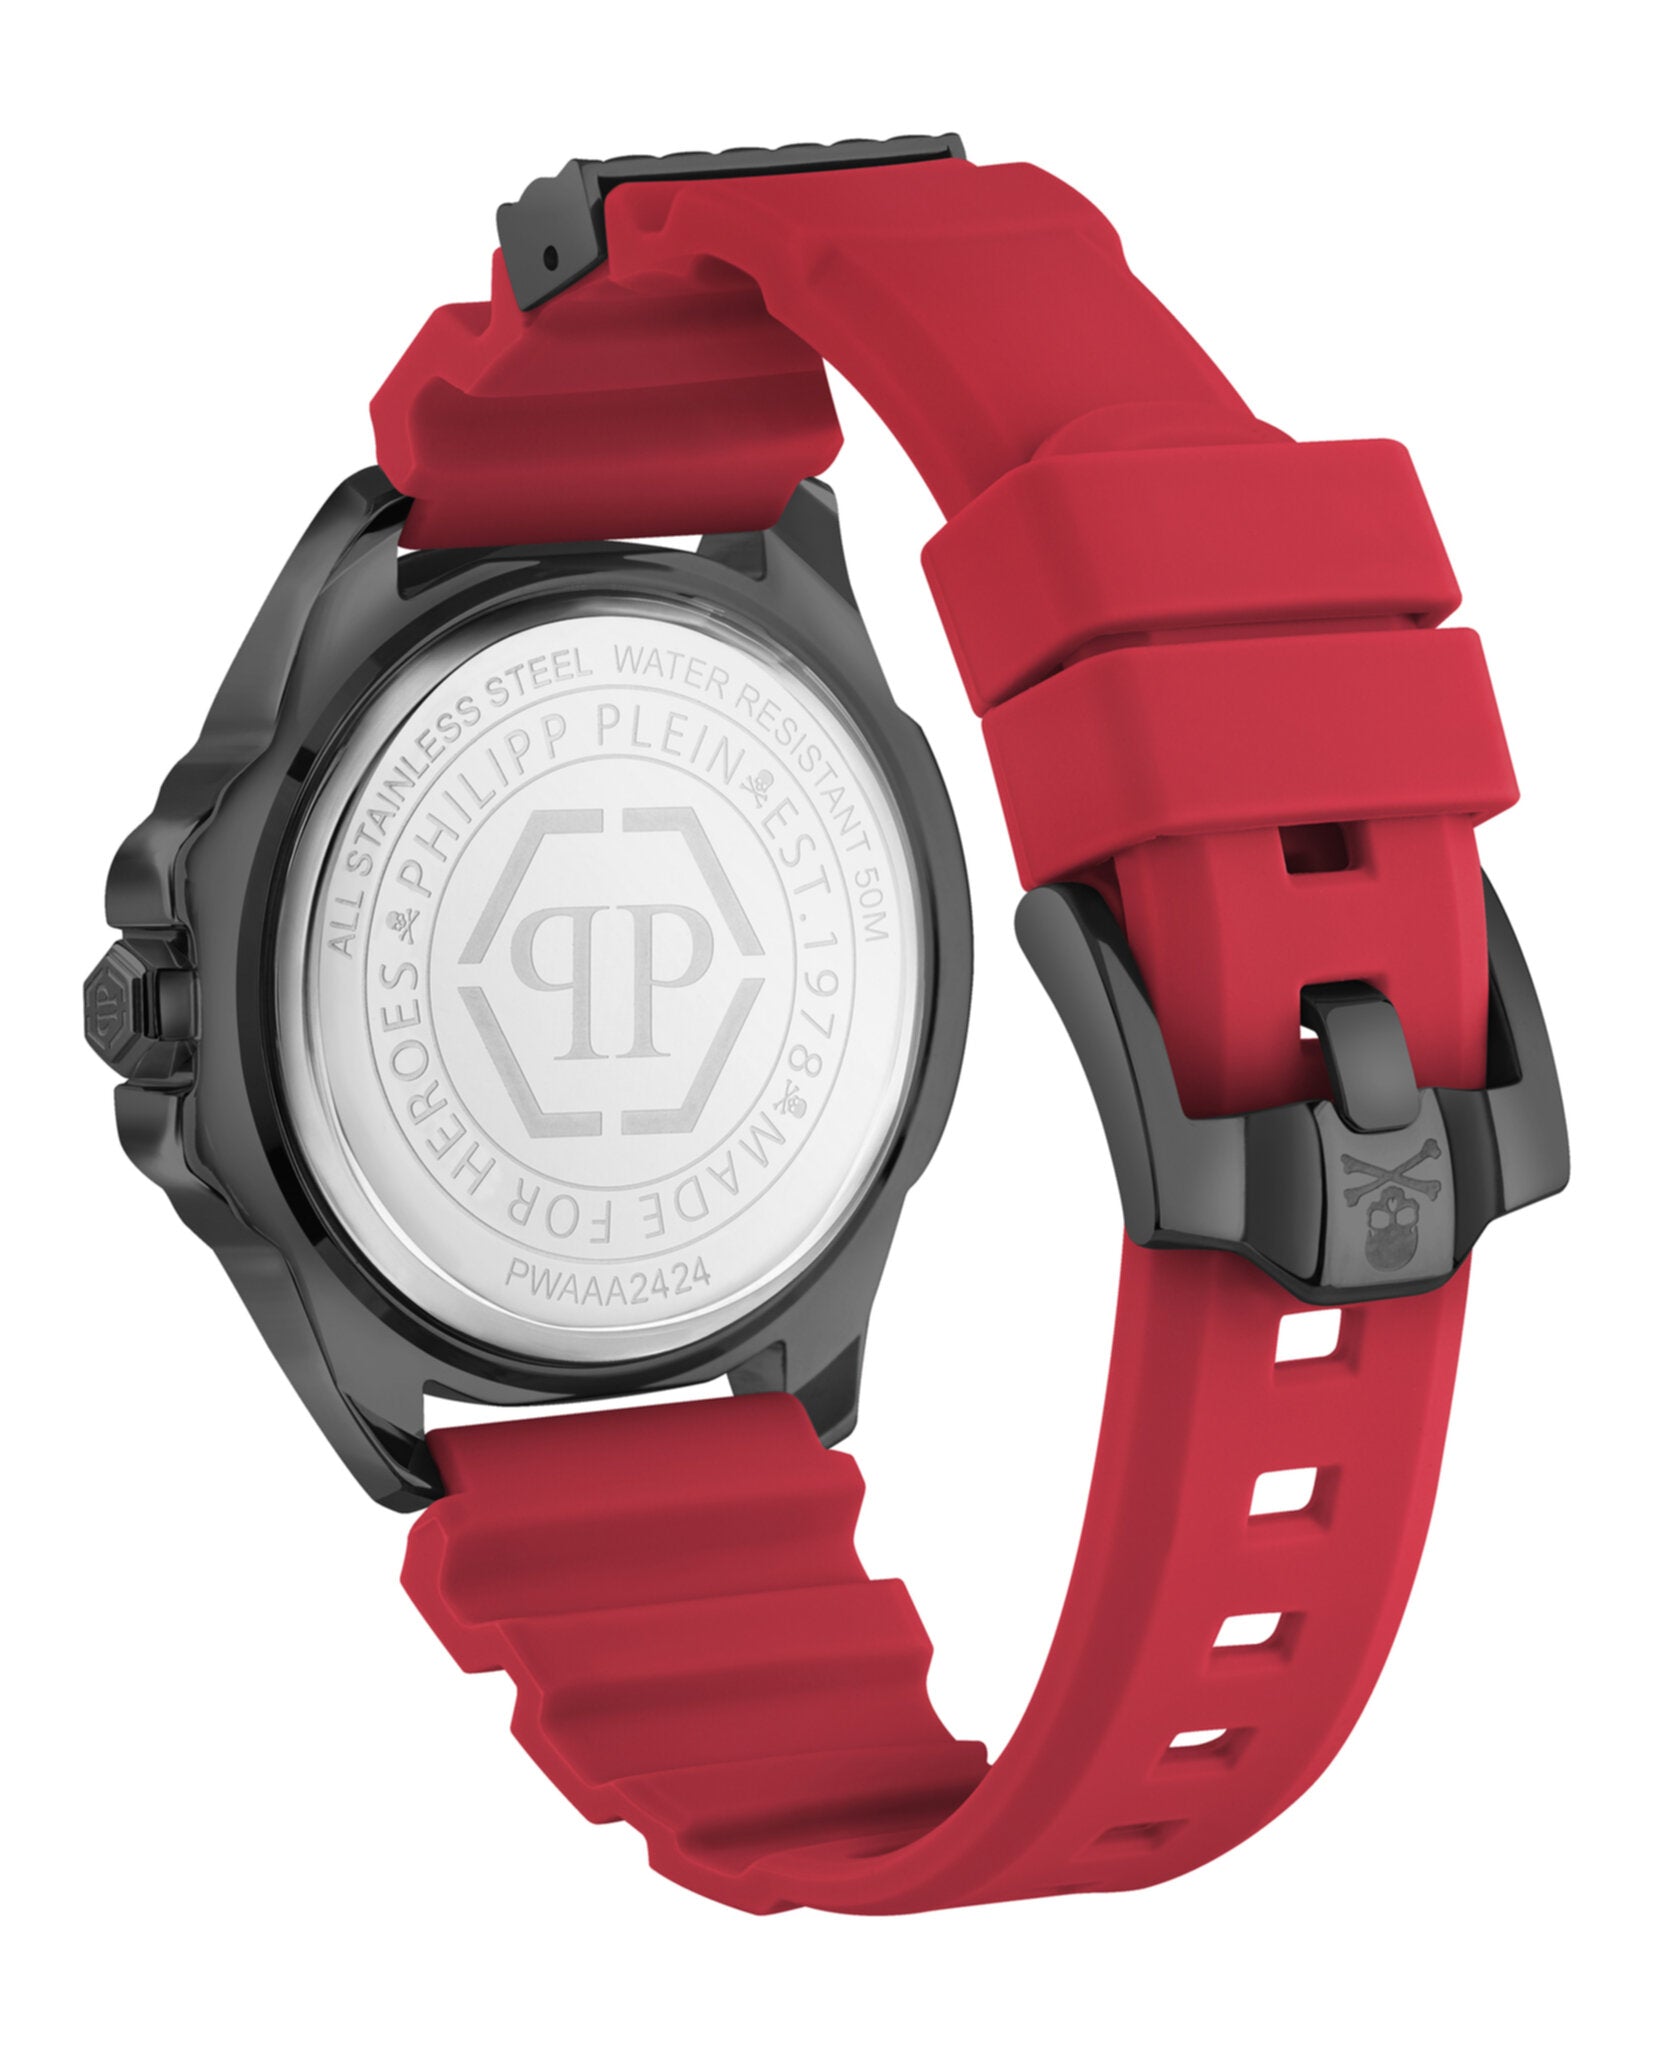 The $kull Silicone Watch